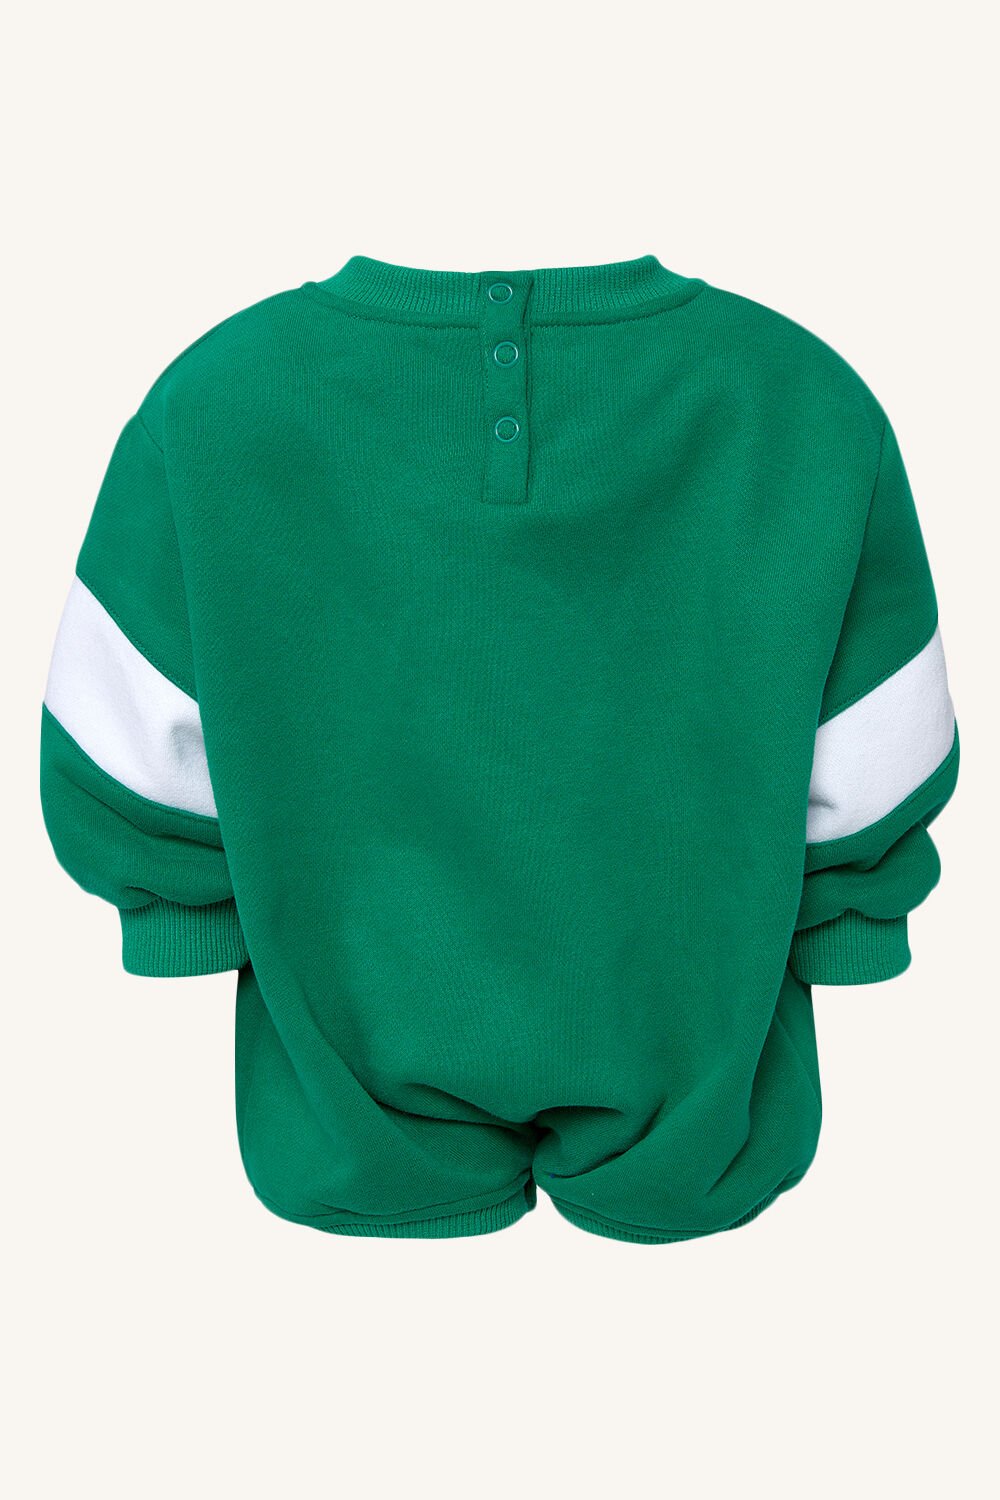 TRACK SWEATER GROW in colour DEEP GRASS GREEN